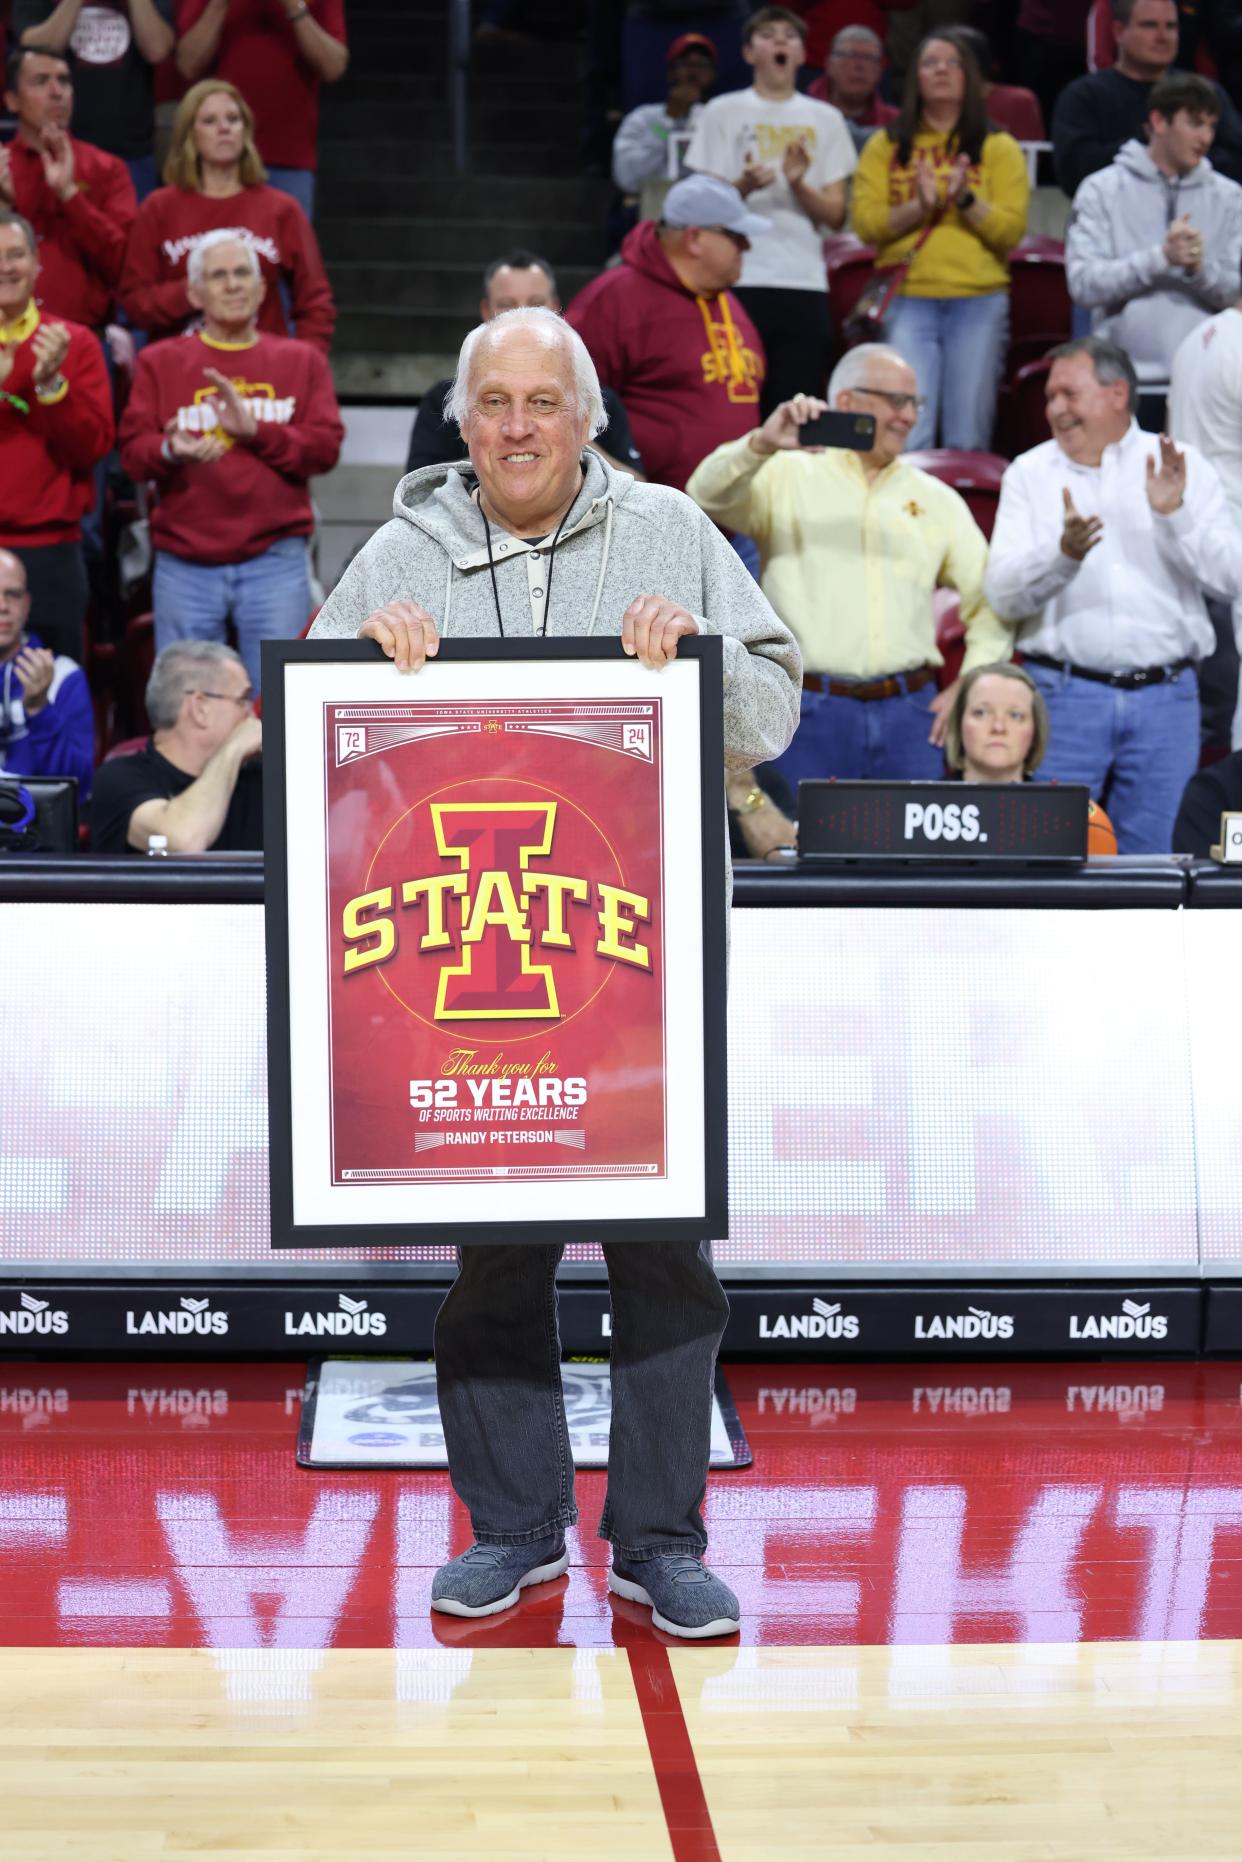 Des Moines Register sports columnist Randy Peterson is honored before the Iowa State vs. BYU men's basketball game at Hilton Coliseum in Ames on March 6. Peterson recently retired after a 52-year career at the Register.